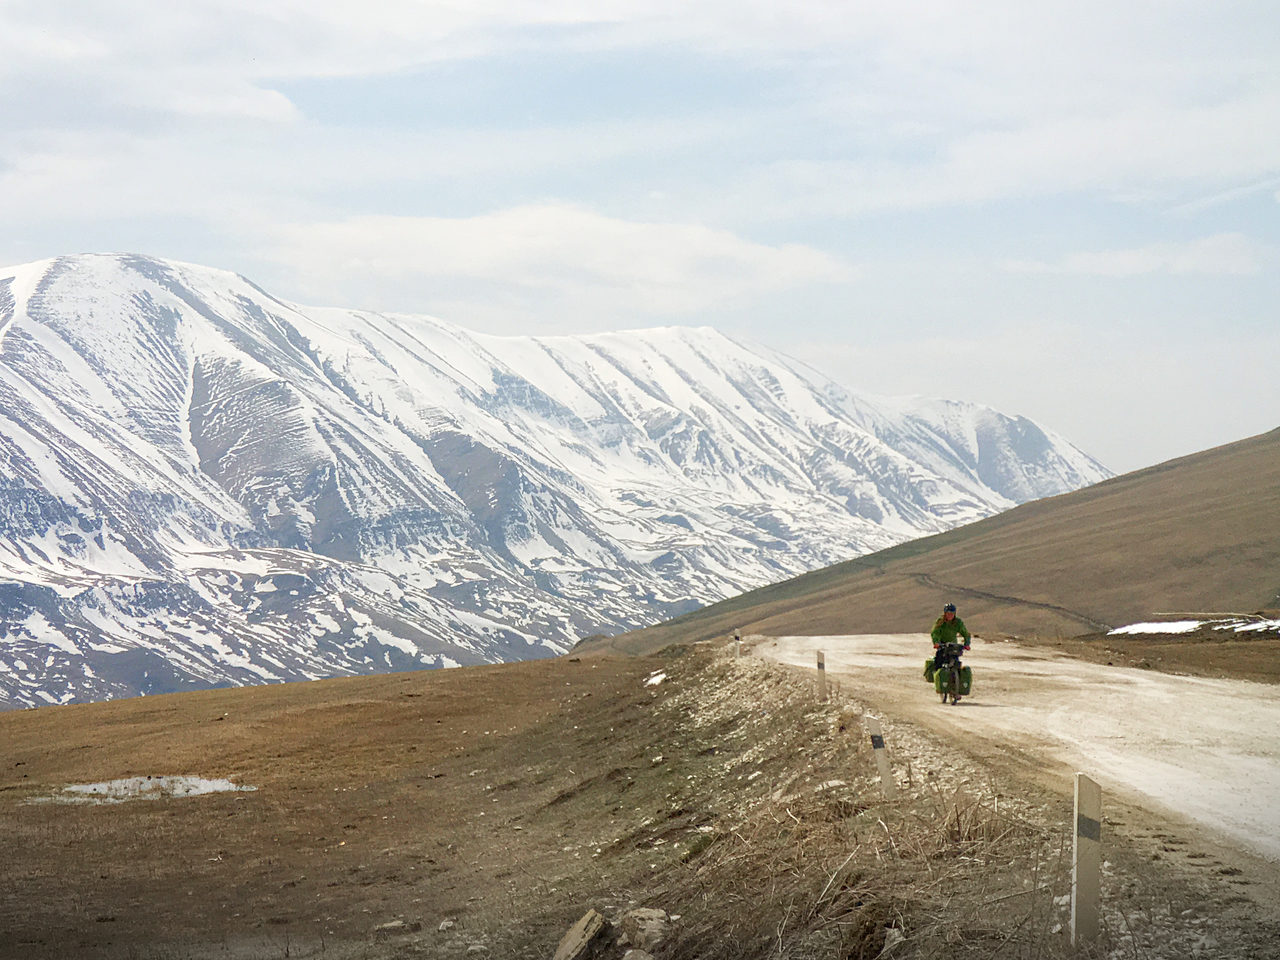 Crossing a pass between Chechnya and Dagestan